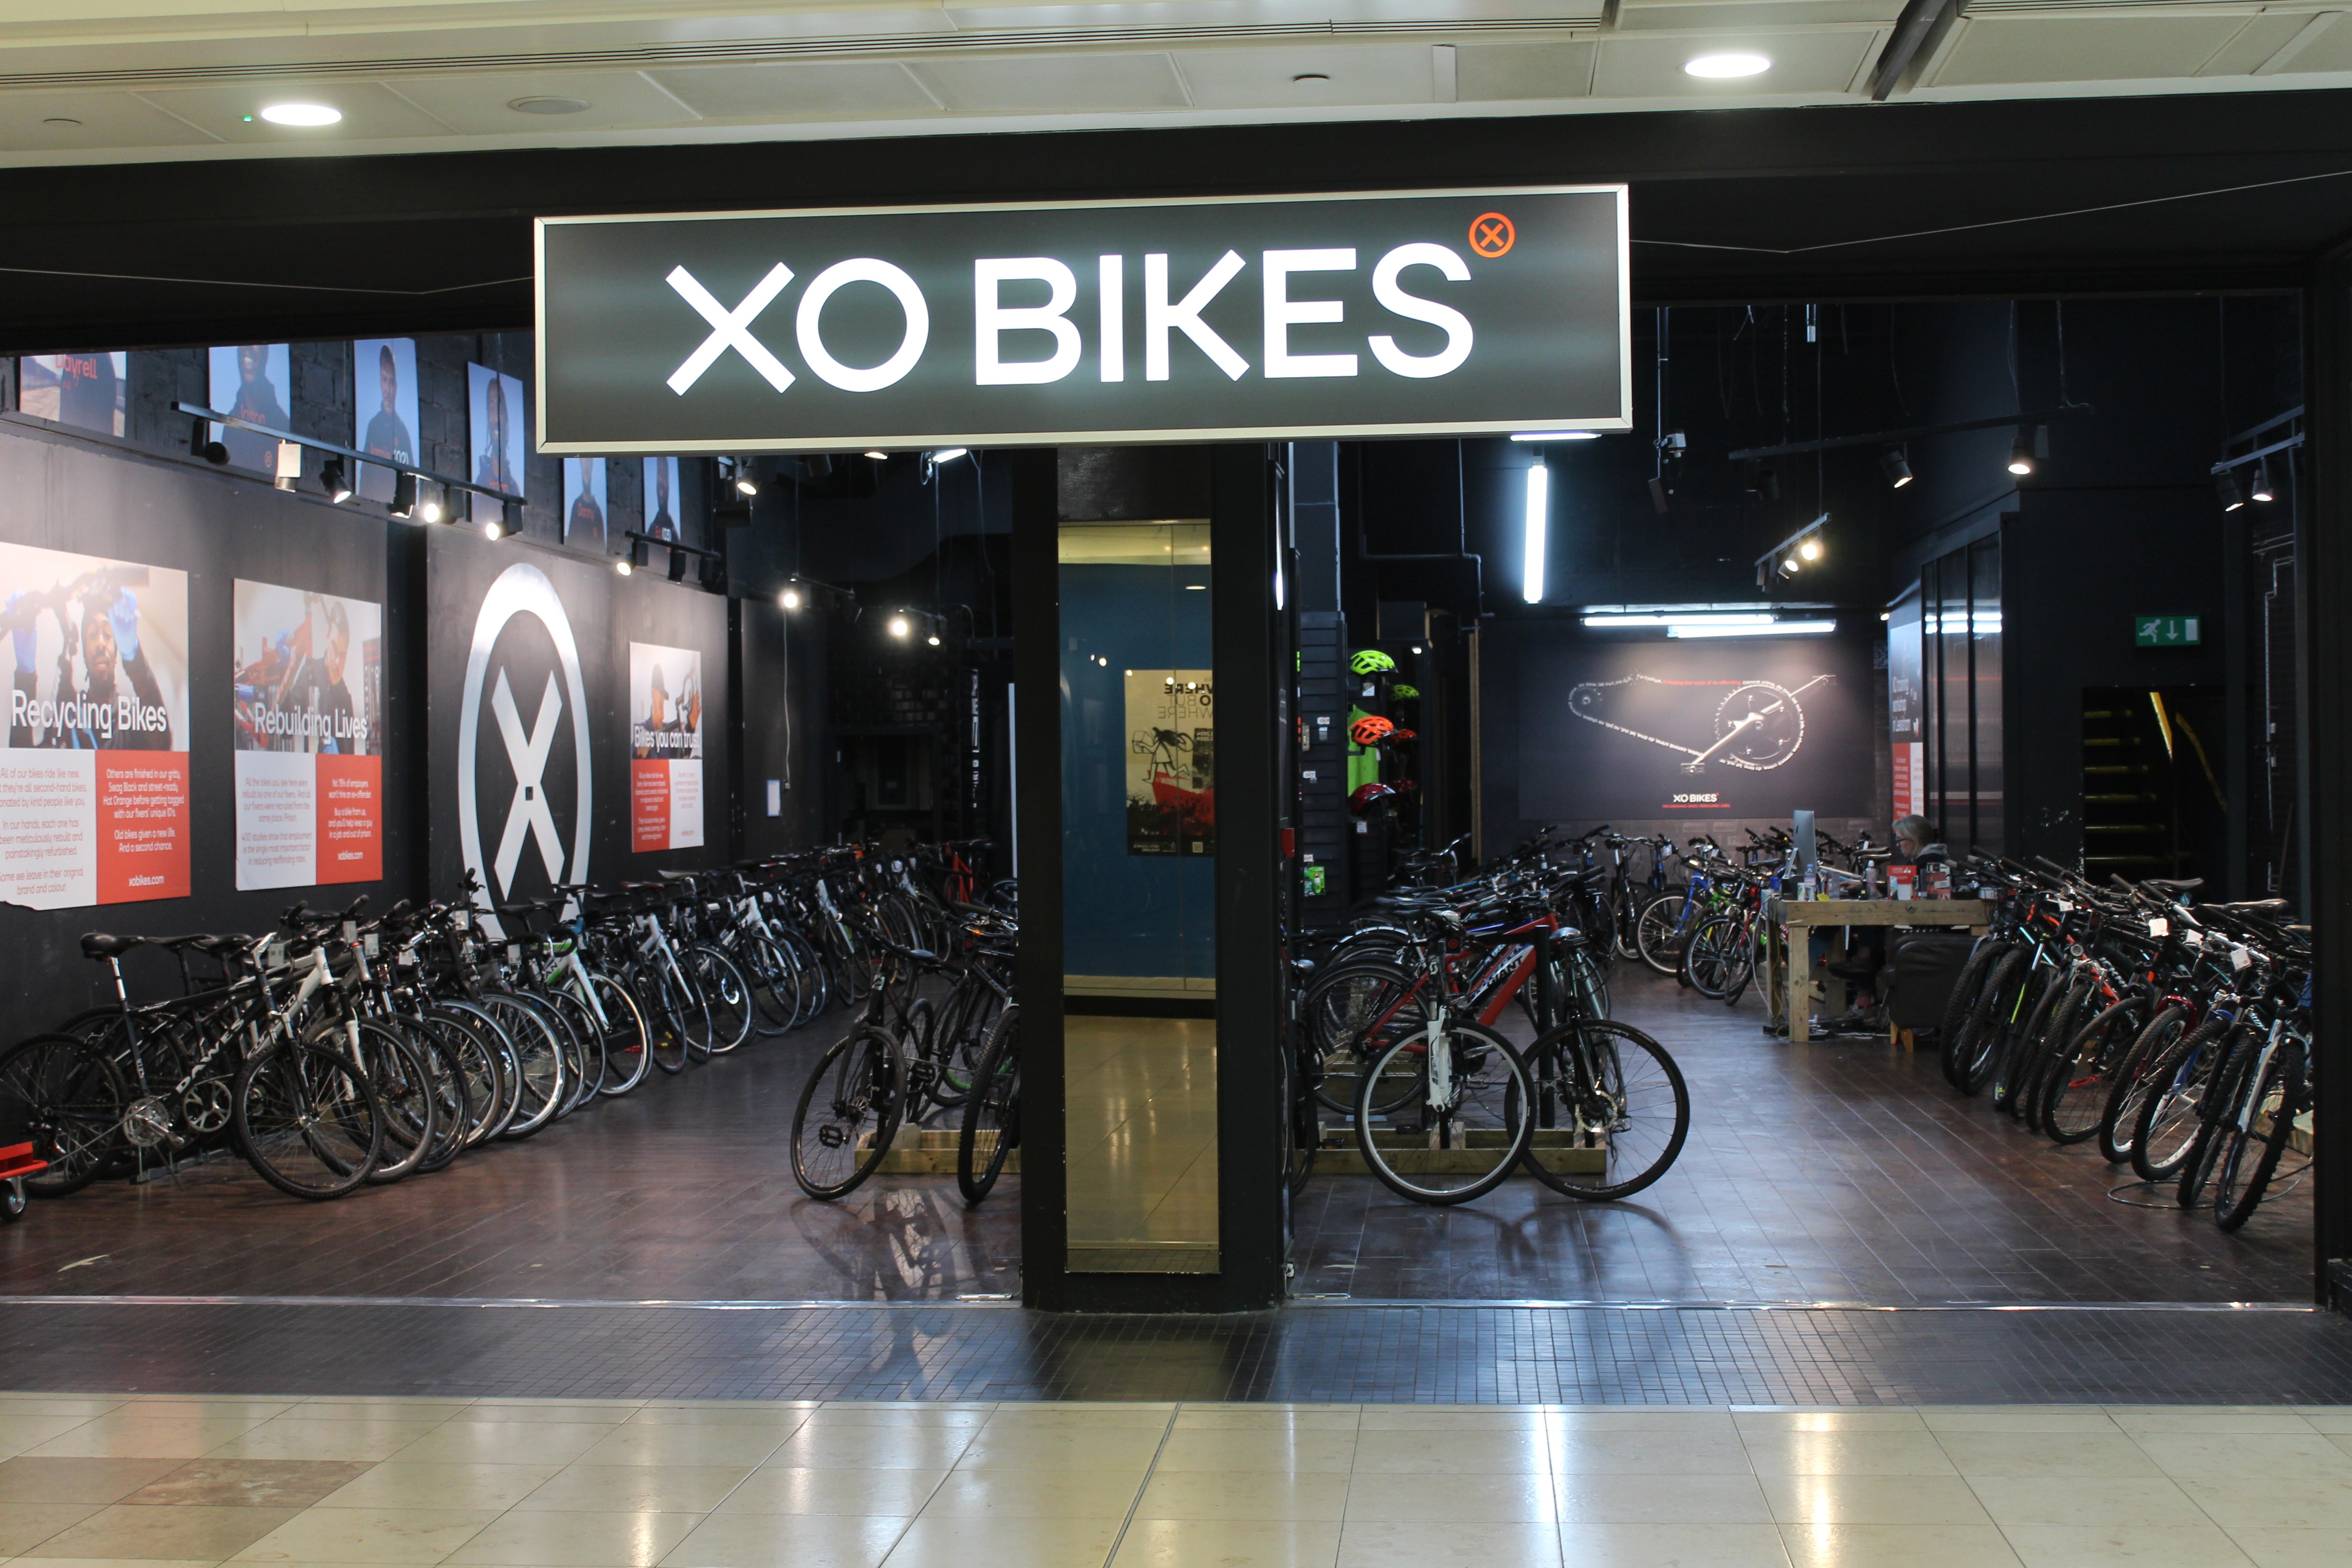 The flagship XO Bikes store is found in Lewisham Shopping Centre